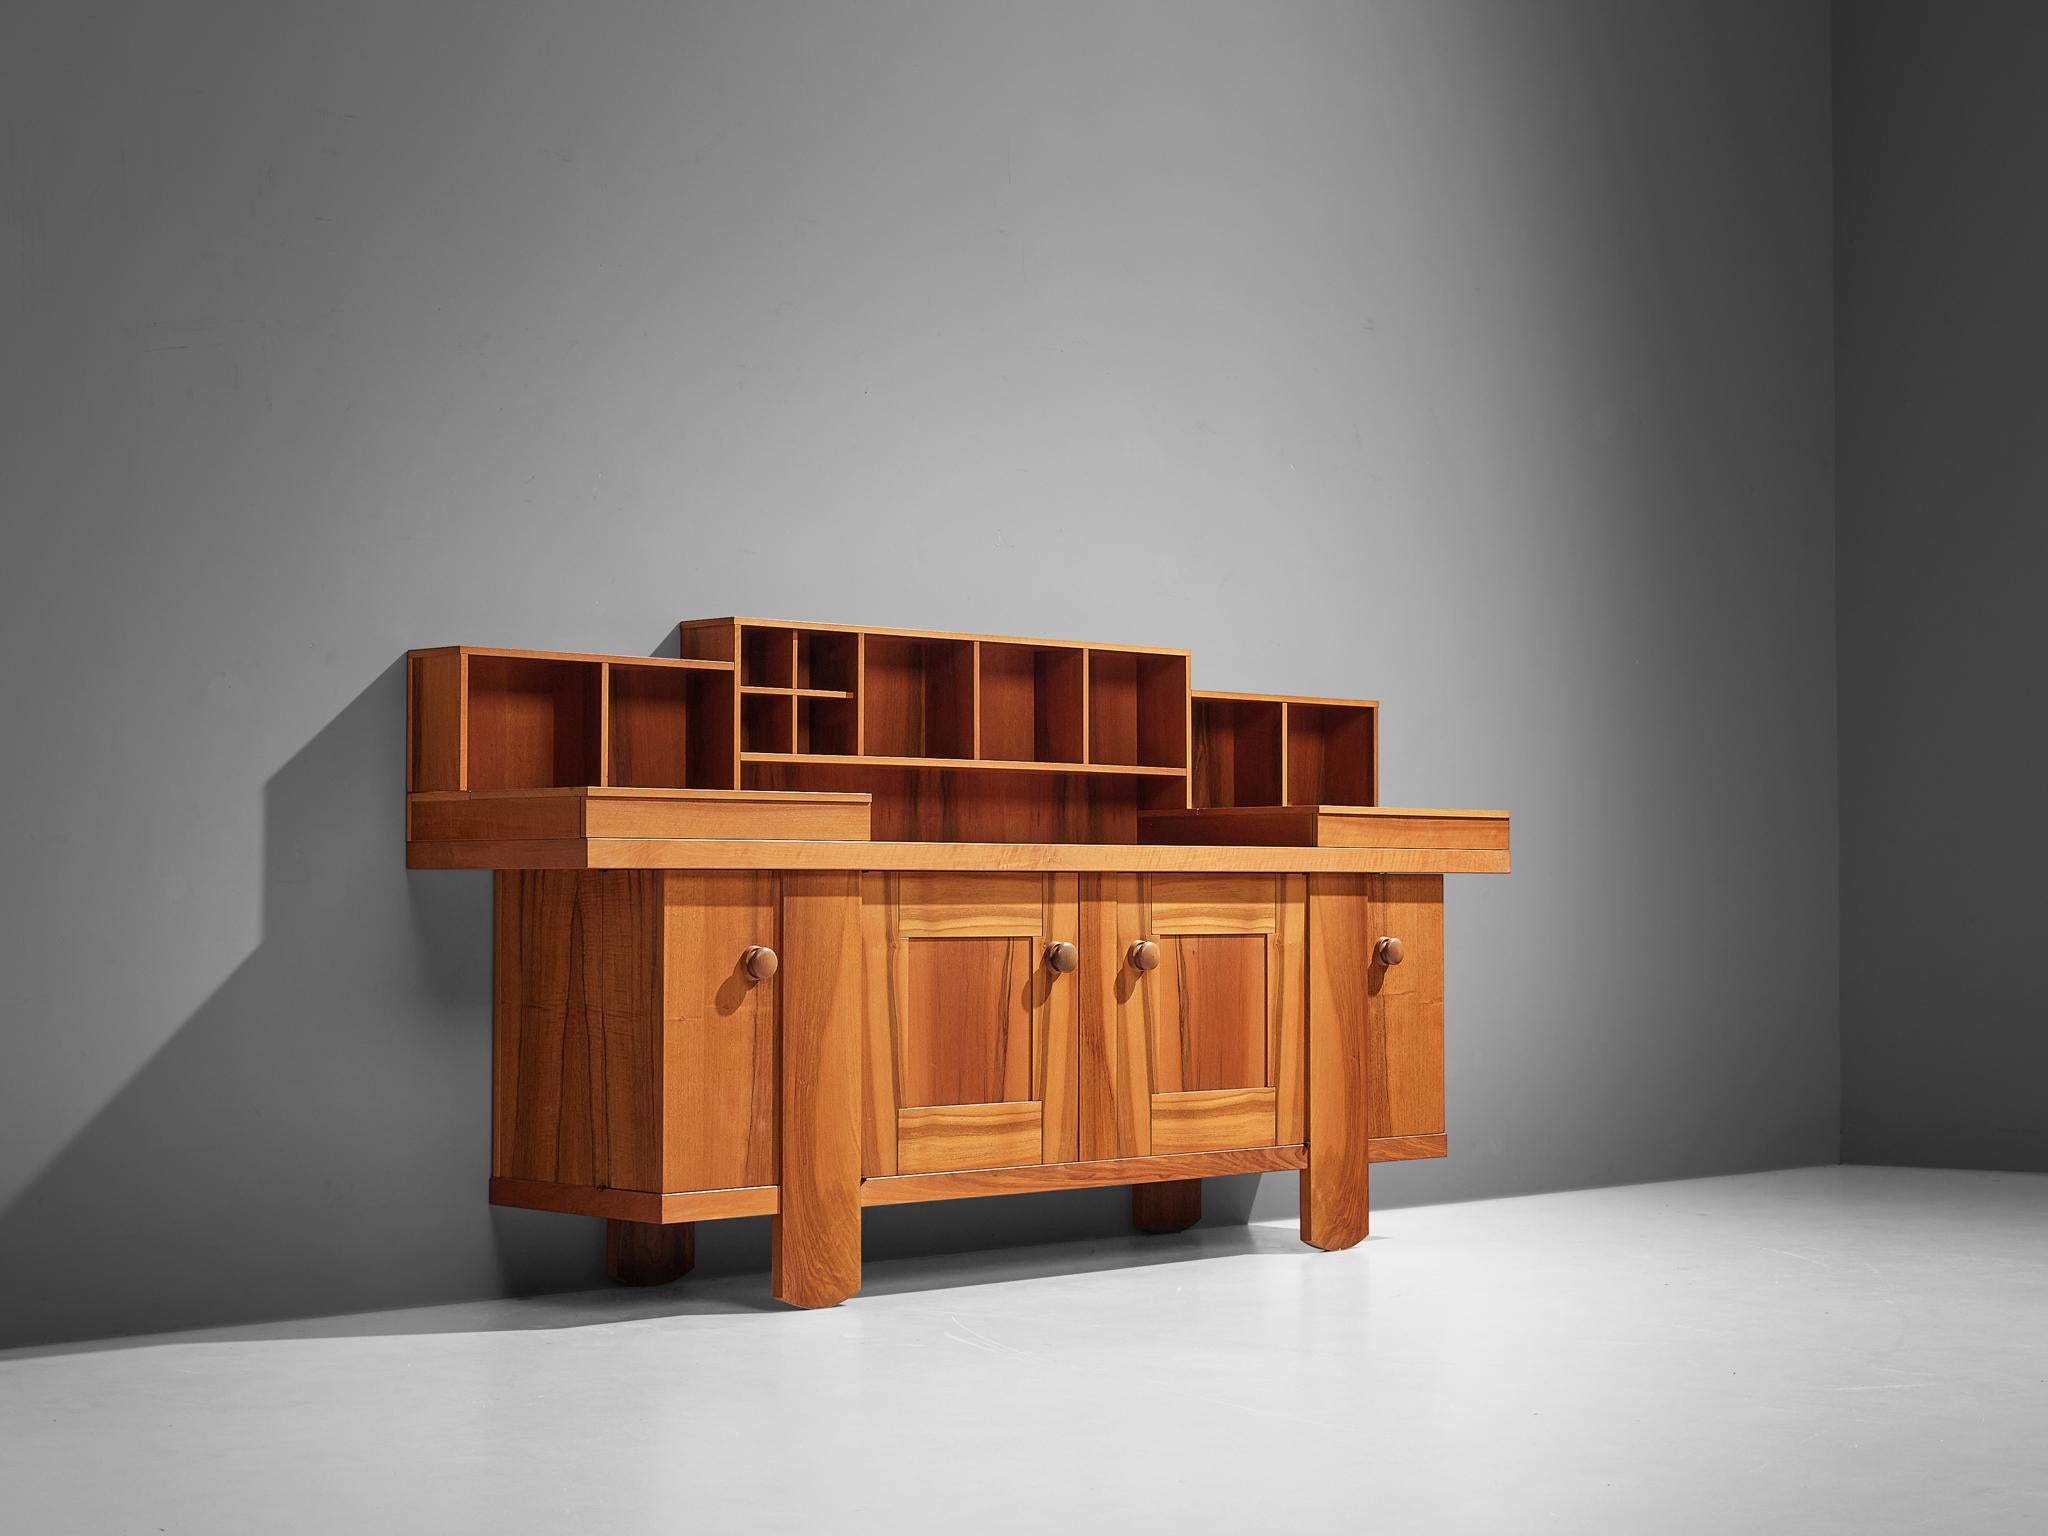 Silvio Coppola for Bernini, sideboard, walnut, Italy, 1966

This impressive sideboard or credenza was designed by Silvio Coppola. It is well-structured with different compartments to store your belongings. Two doors in the middle and two corner